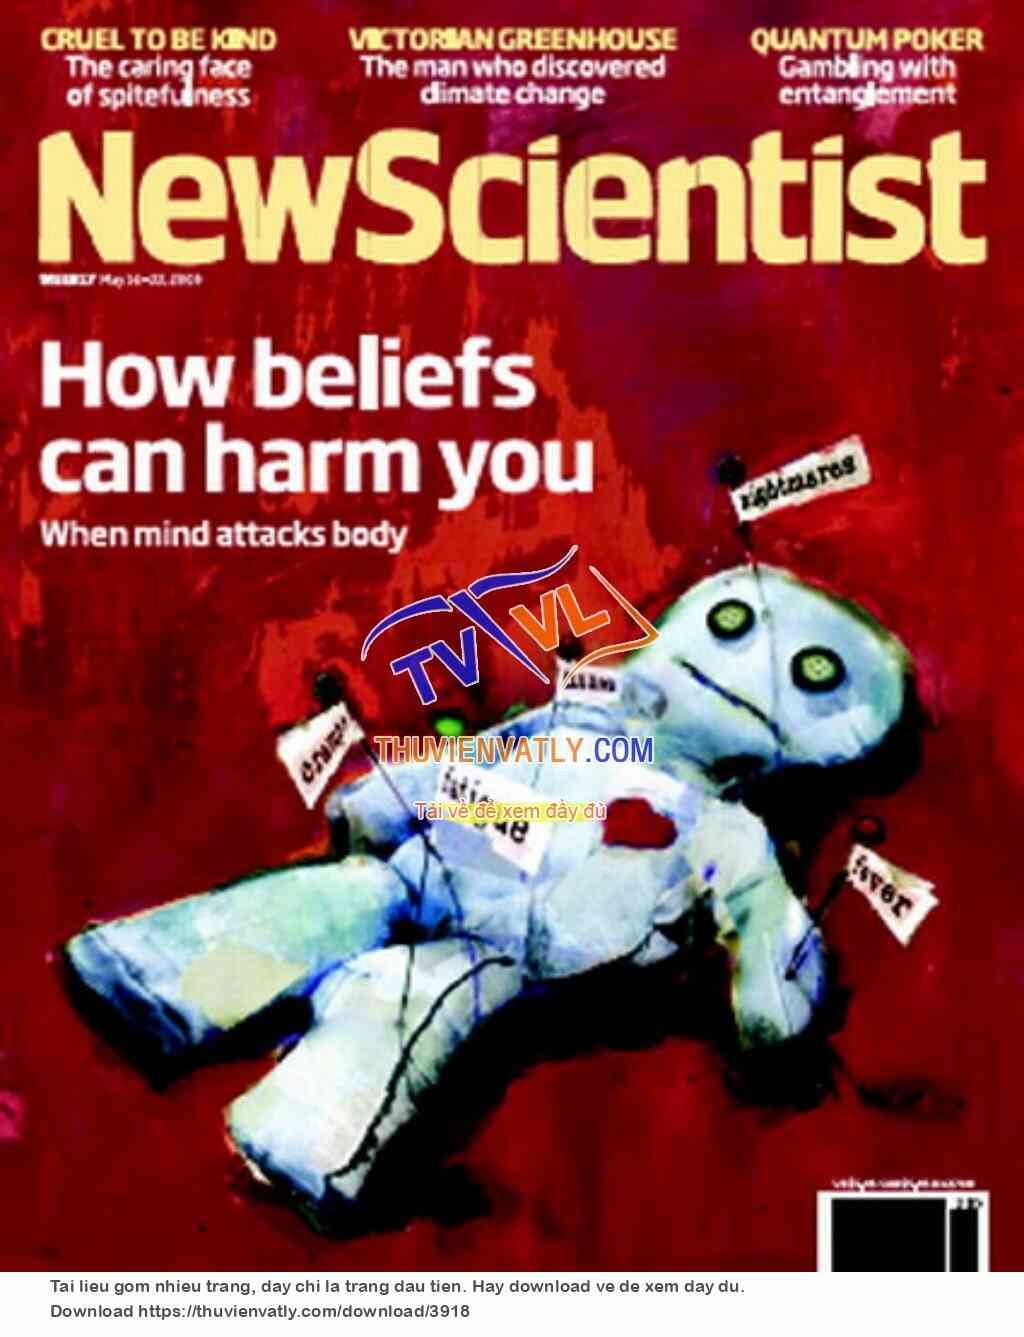 New Scientist - May 16 2009